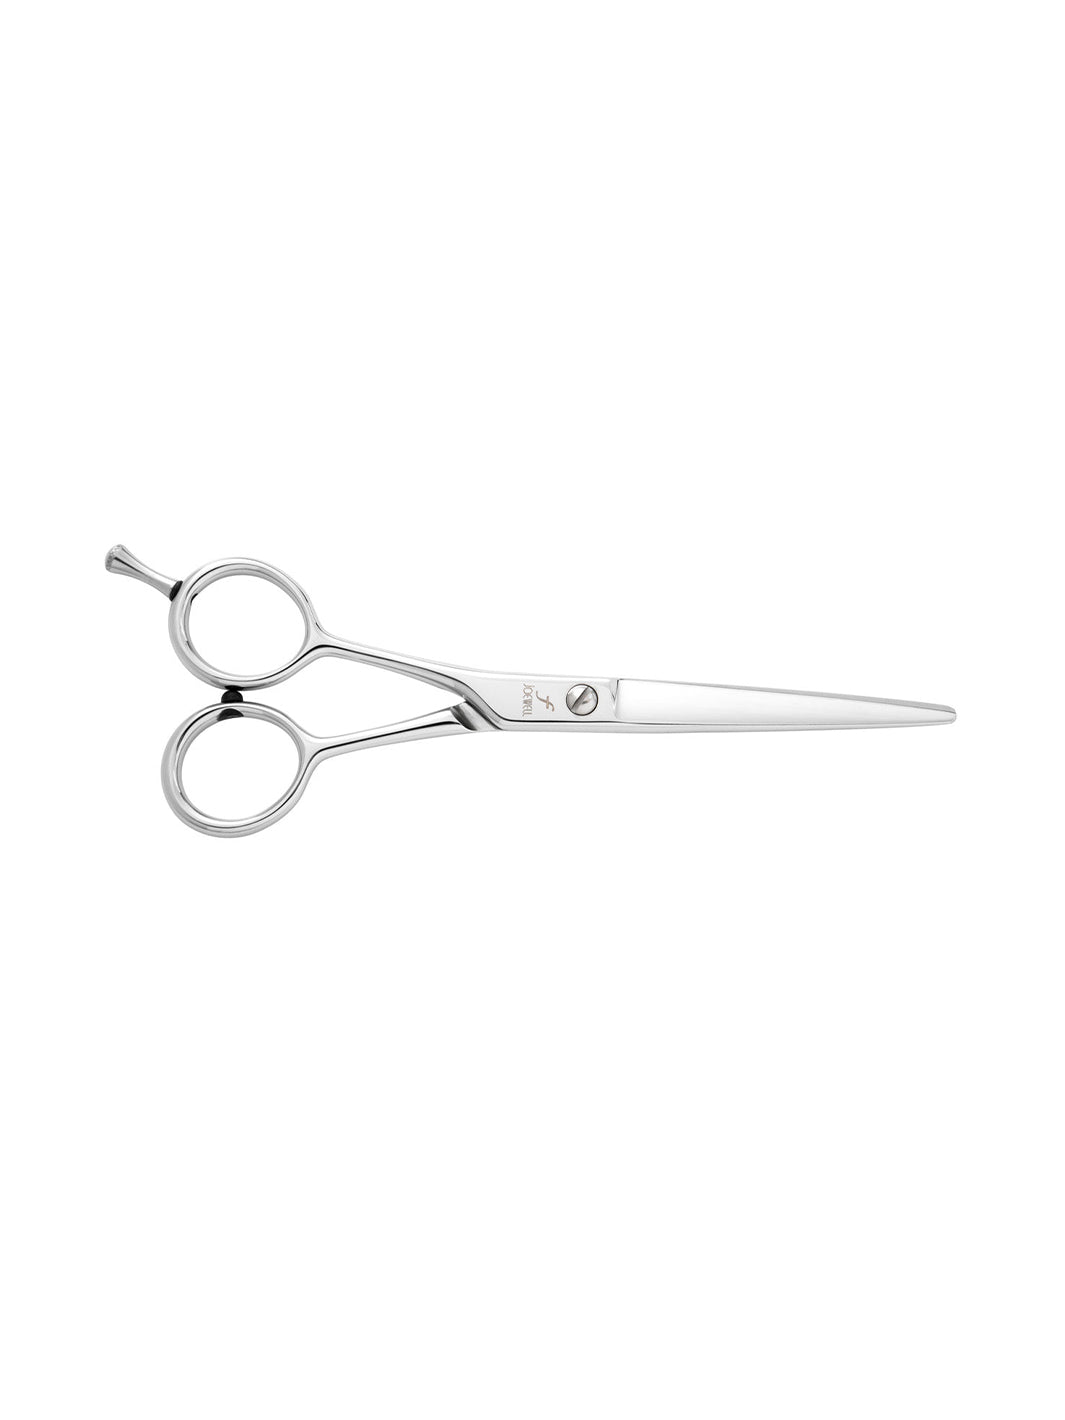 Left Handed Classic Shears - LC (5in / 6in)